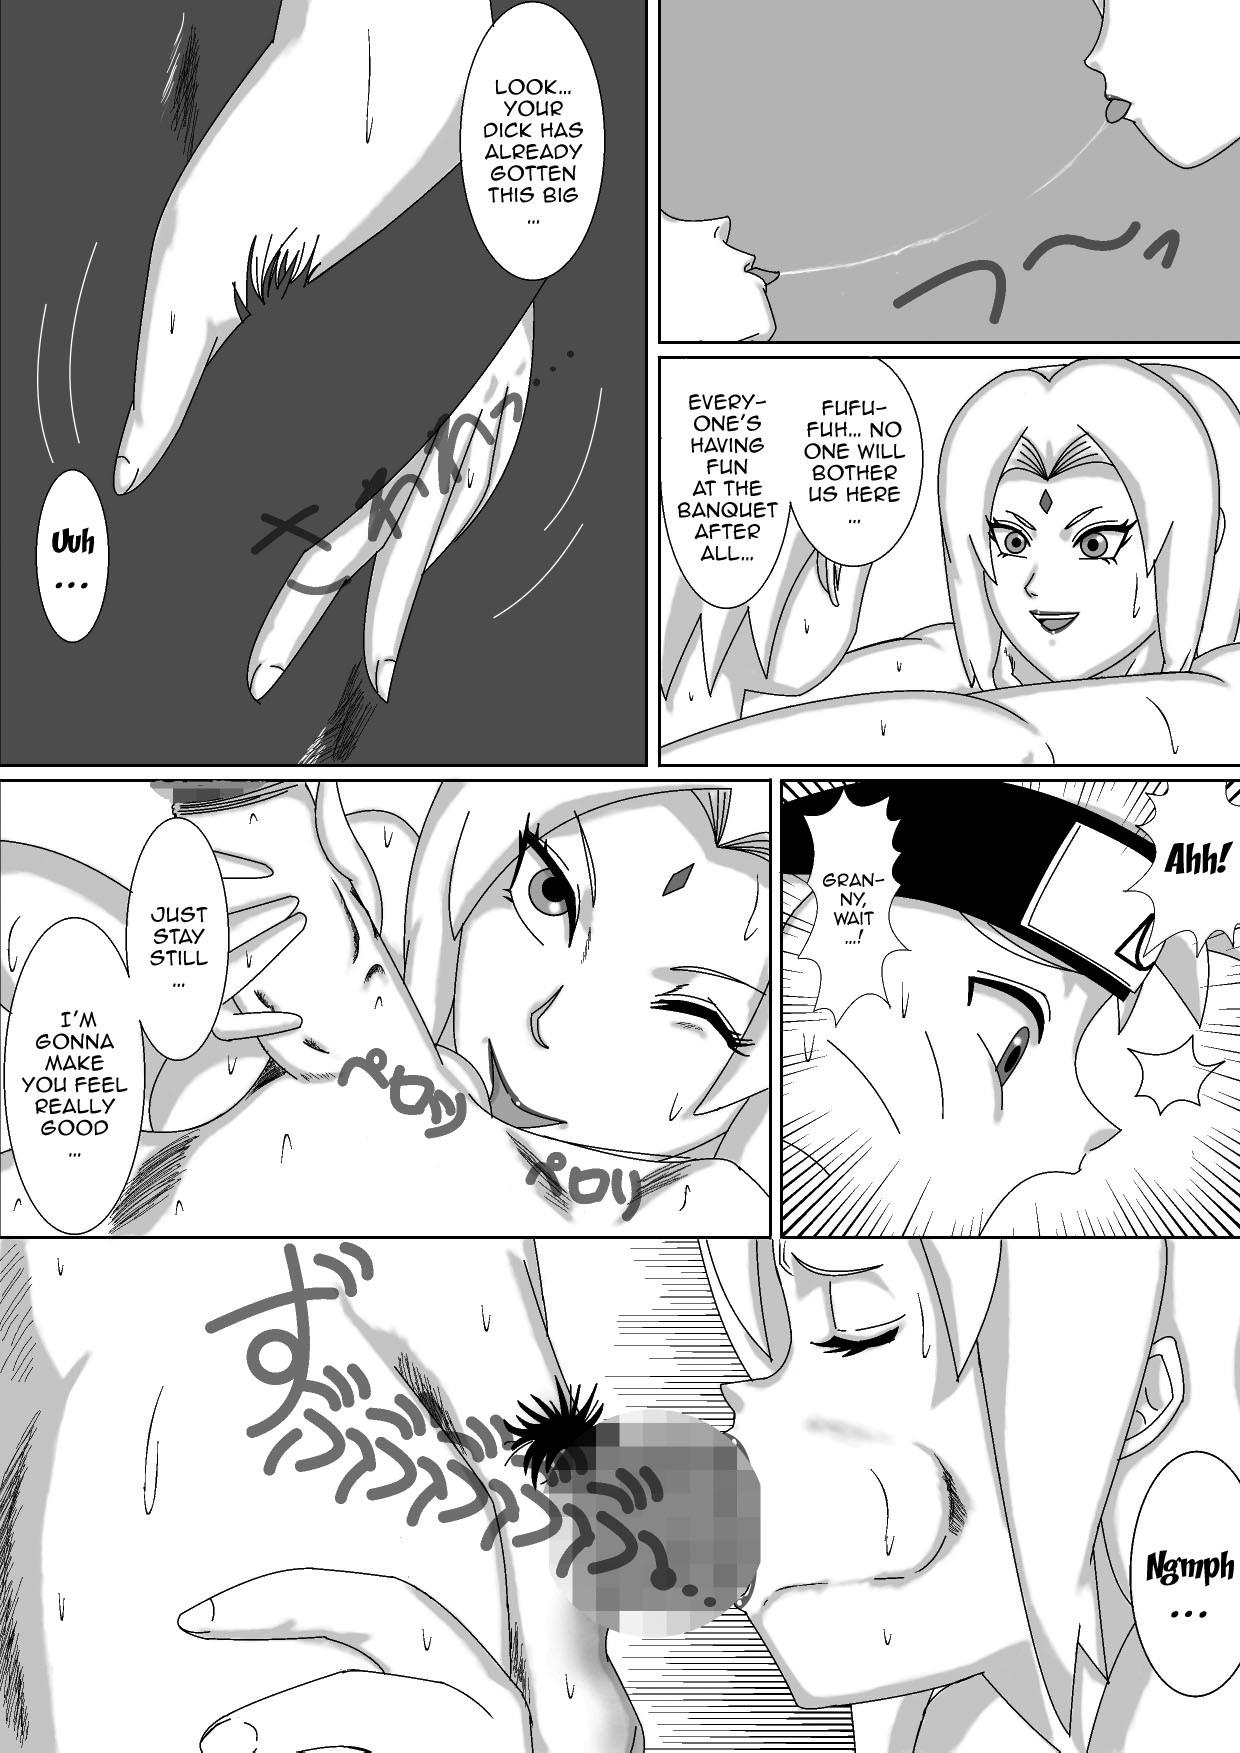 Bra Nomisugite Deisui Shita BBA to Yarimakutta Ken!! | The Case Of Having Sex With This Old Lady After She Got Herself Really Drunk - Naruto Cumload - Page 7